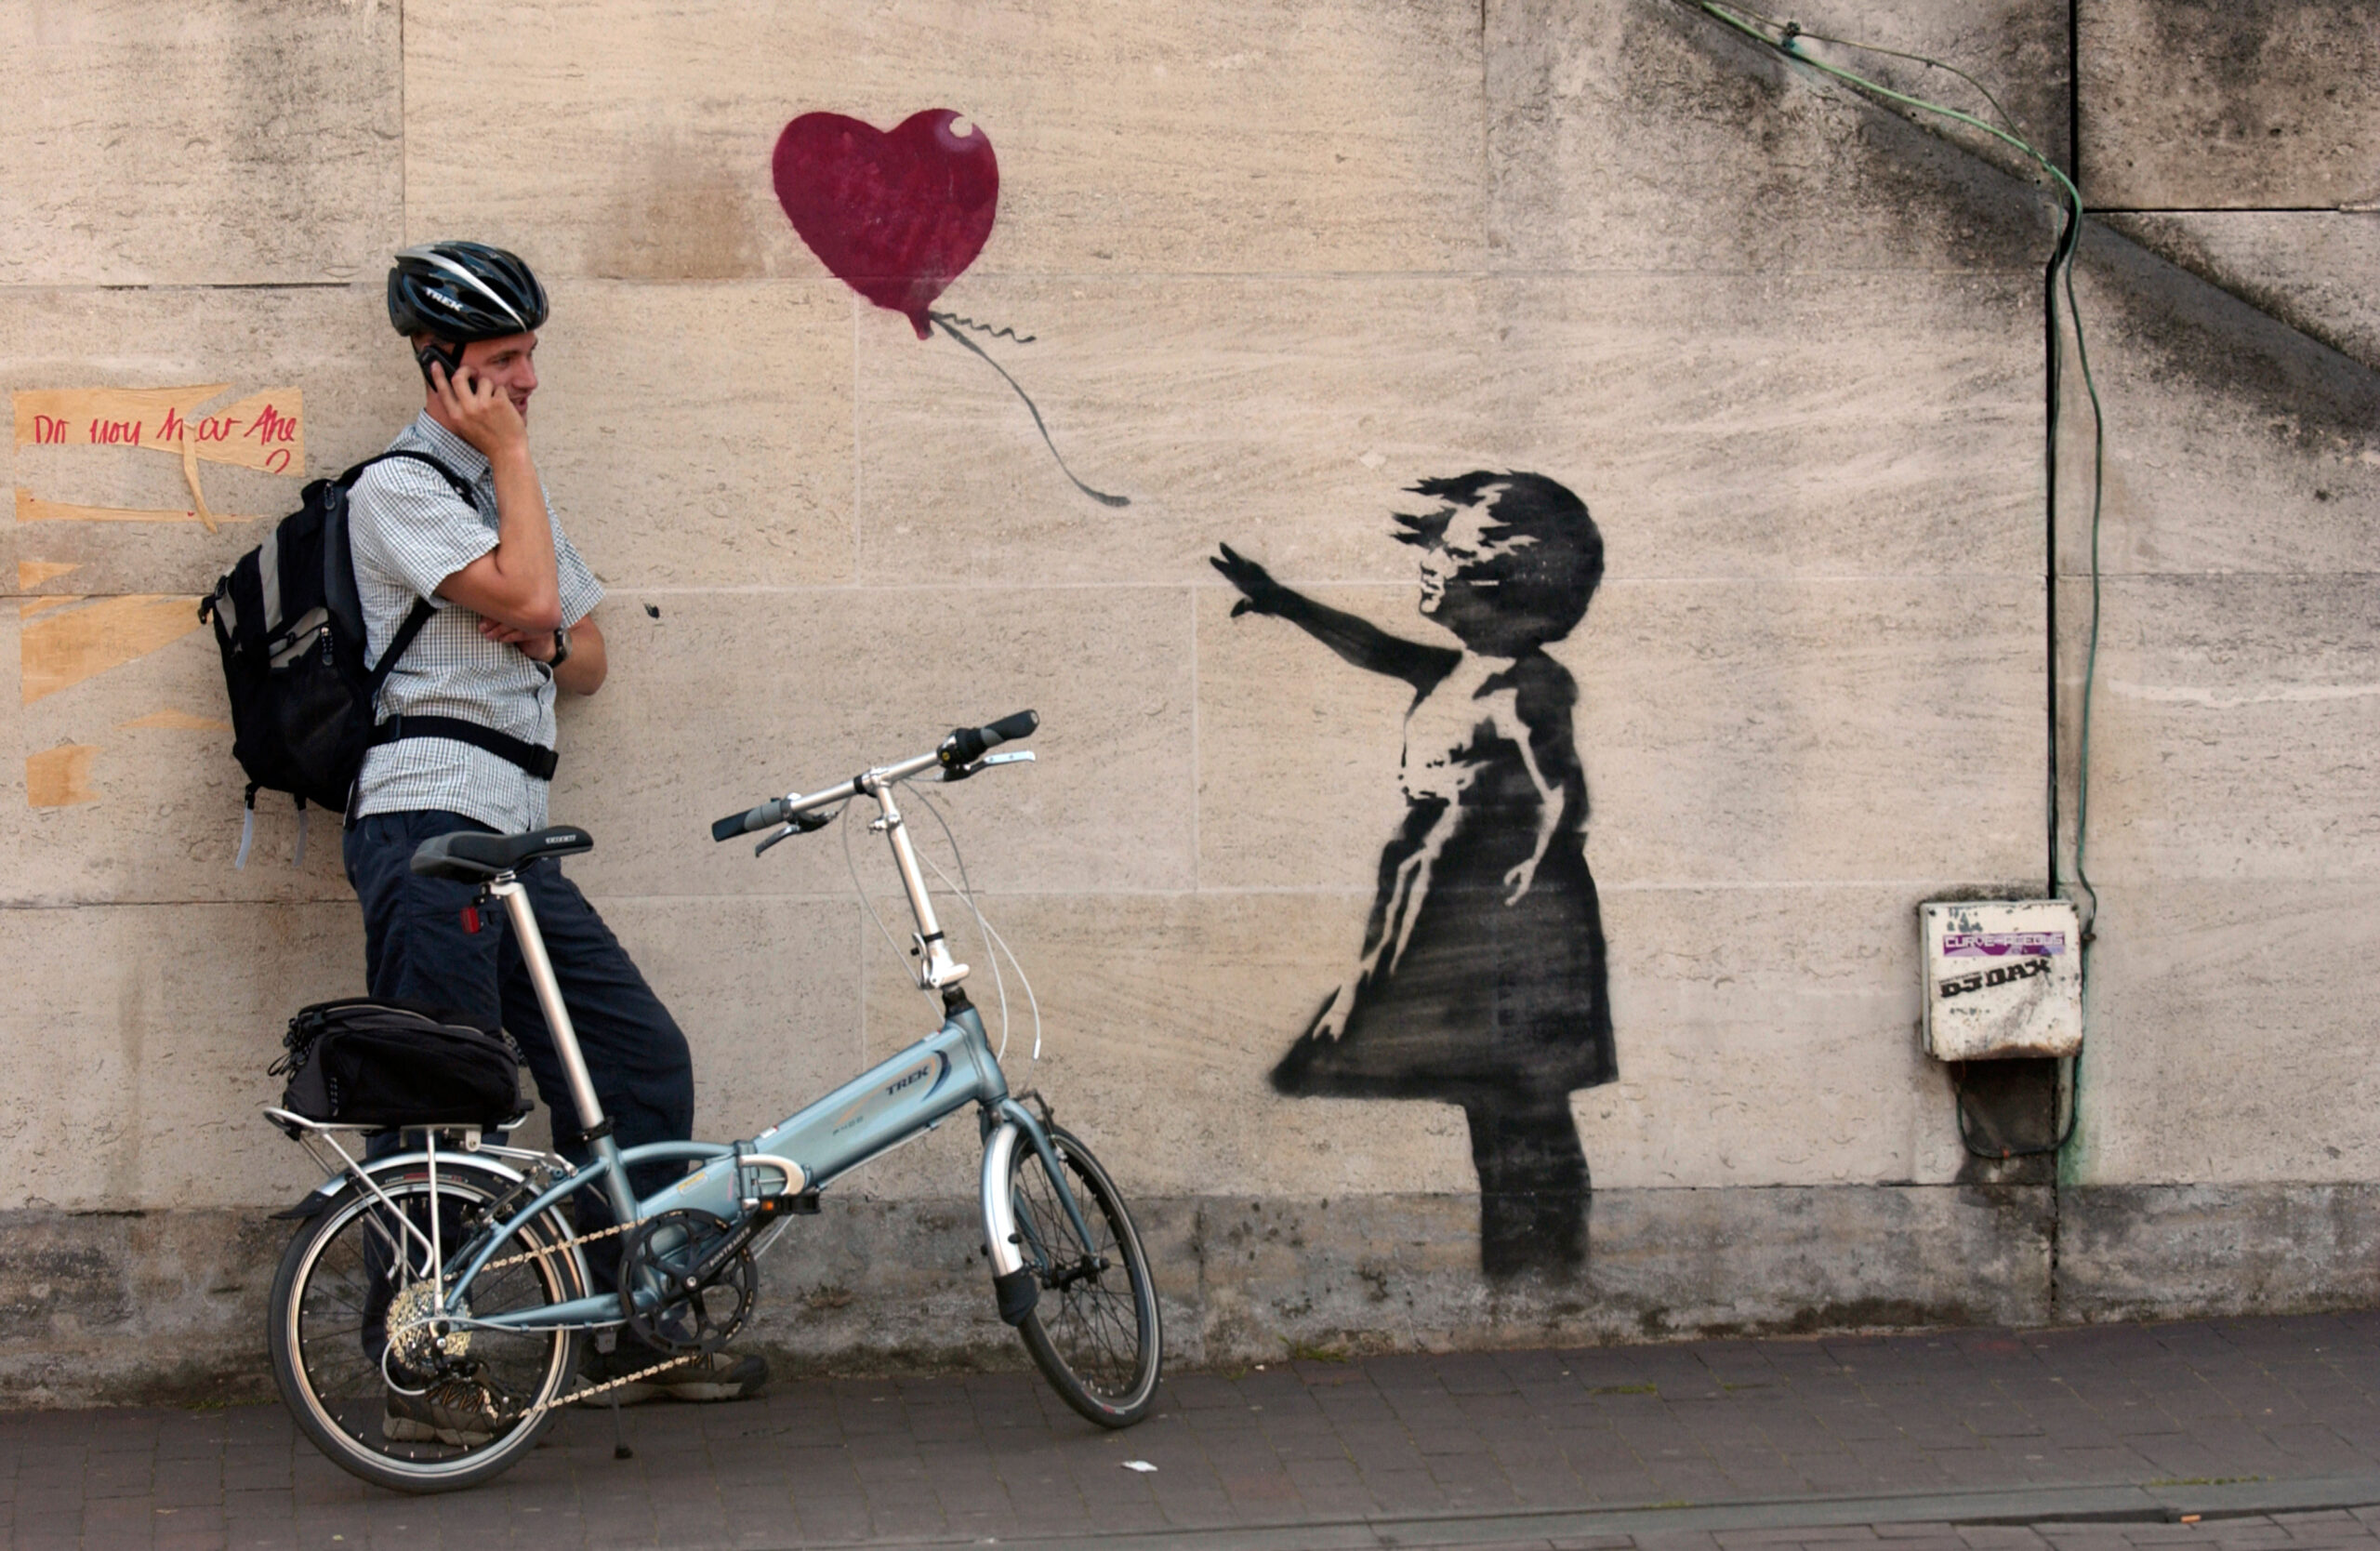 Girl With Balloon on London's South Bank is among Banksy's most famous works